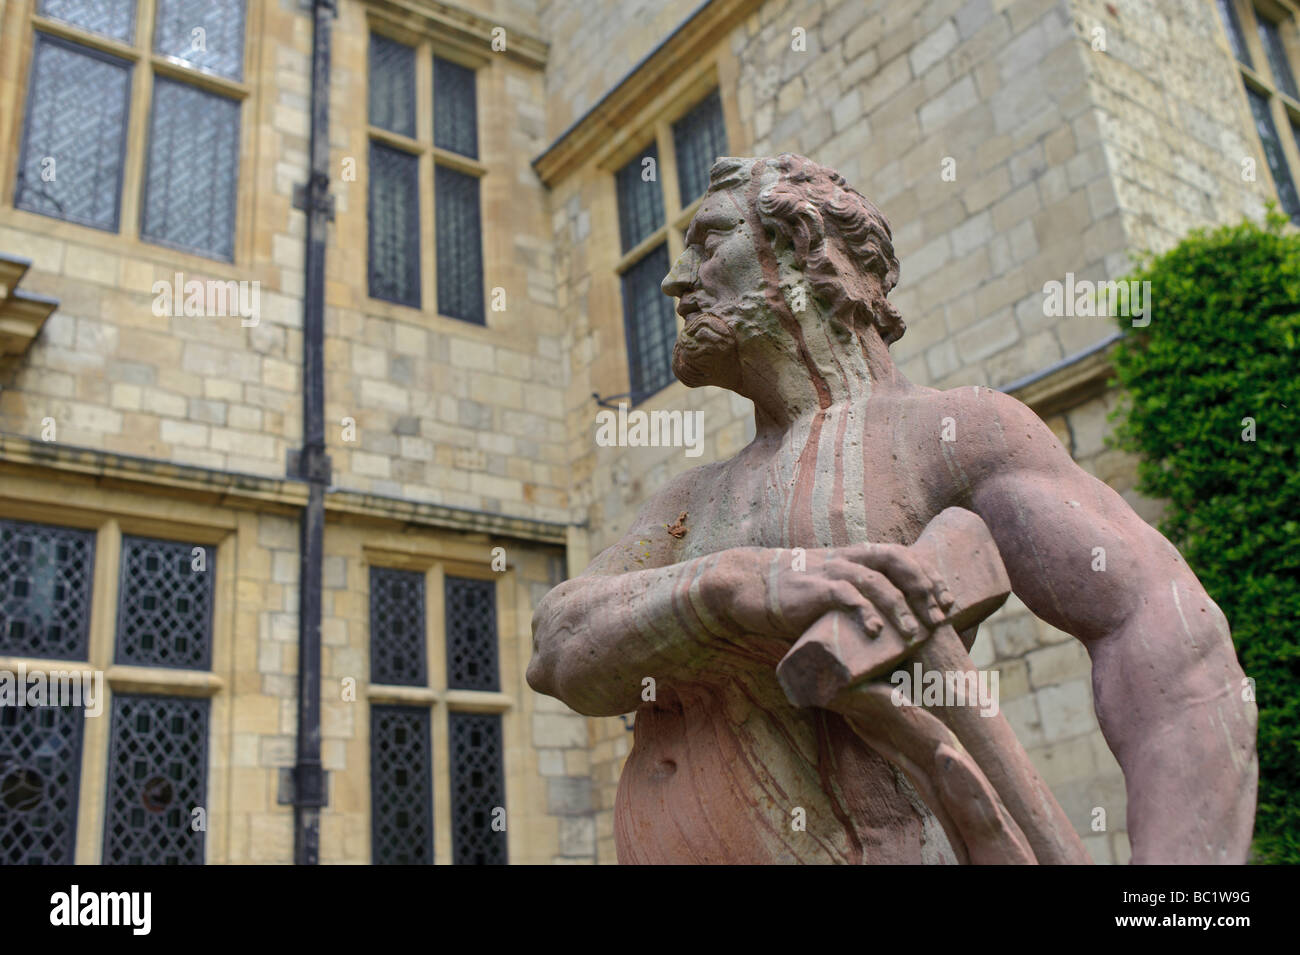 The Tresurer's House in  York with statues in front of it, england Stock Photo